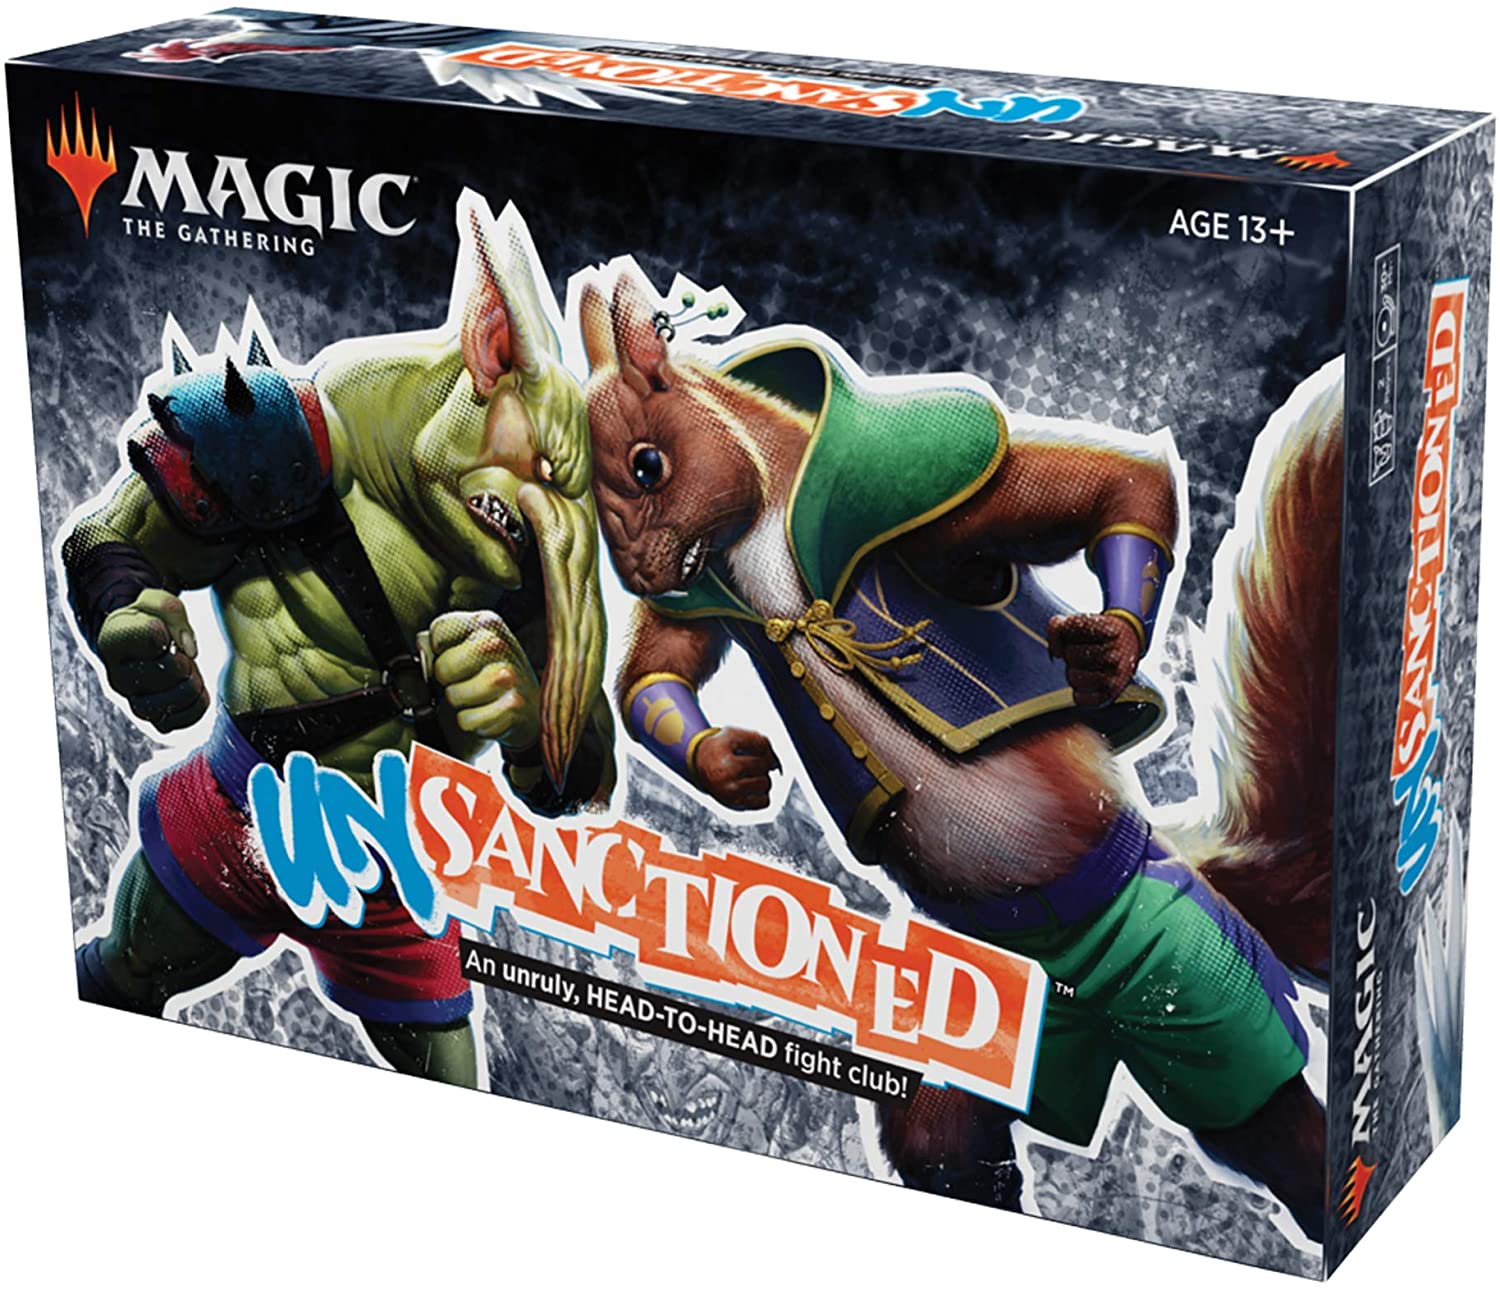 2020 Magic the Gathering MTG Unsanctioned Box Set New Factory Sealed inv:A39 